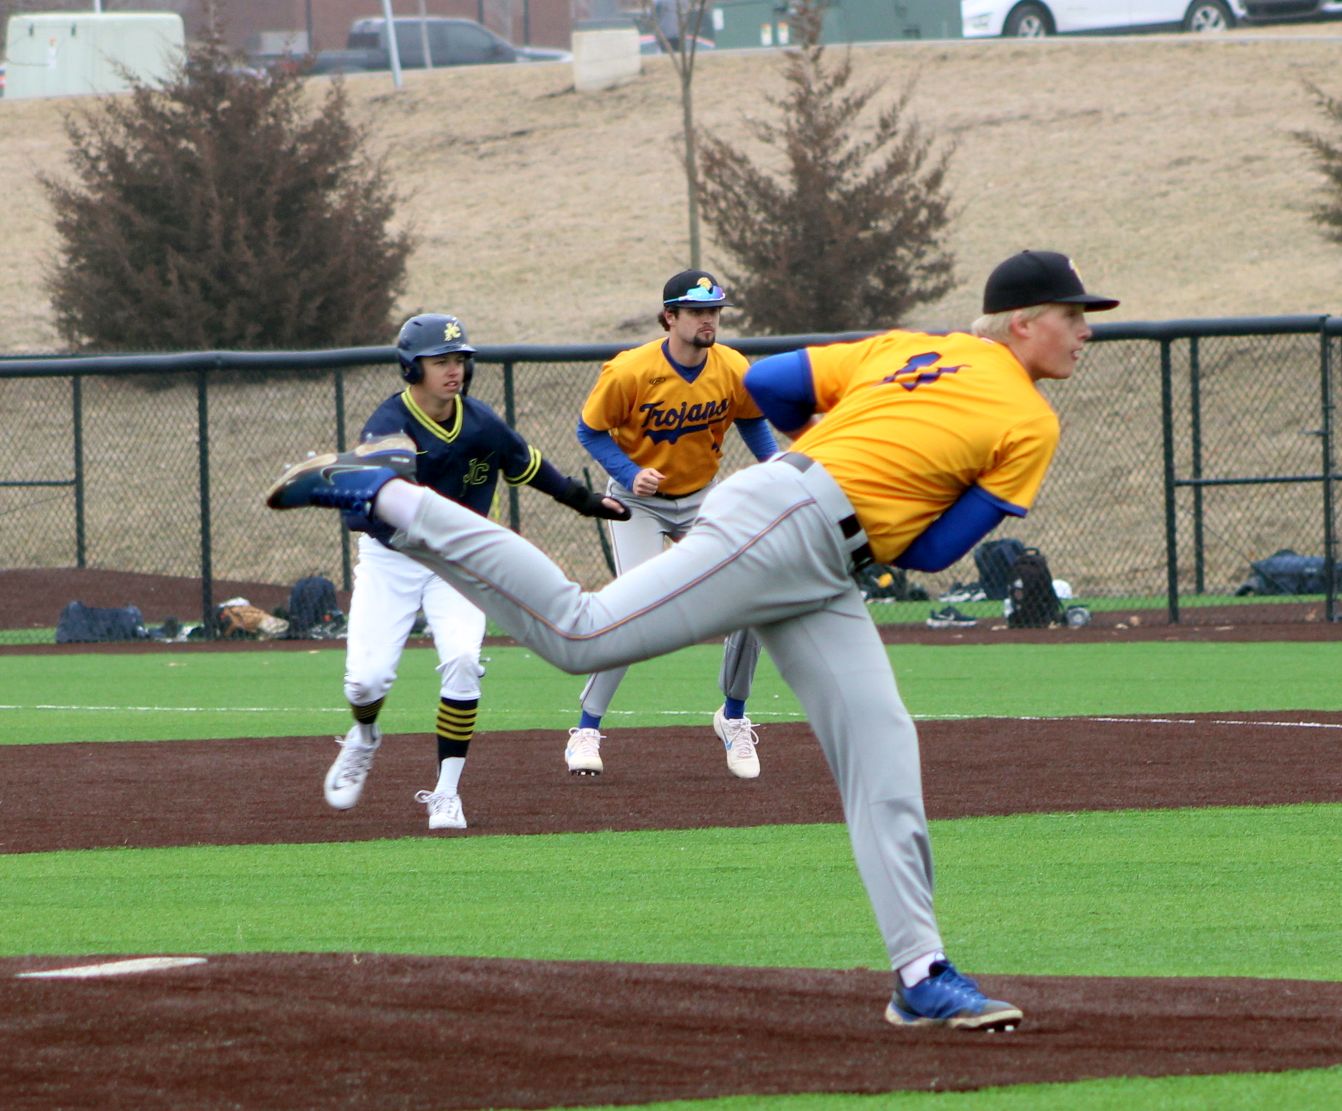 NIACC's Austin Klug delivers a pitch in a game earlier this season at Johnson County CC.